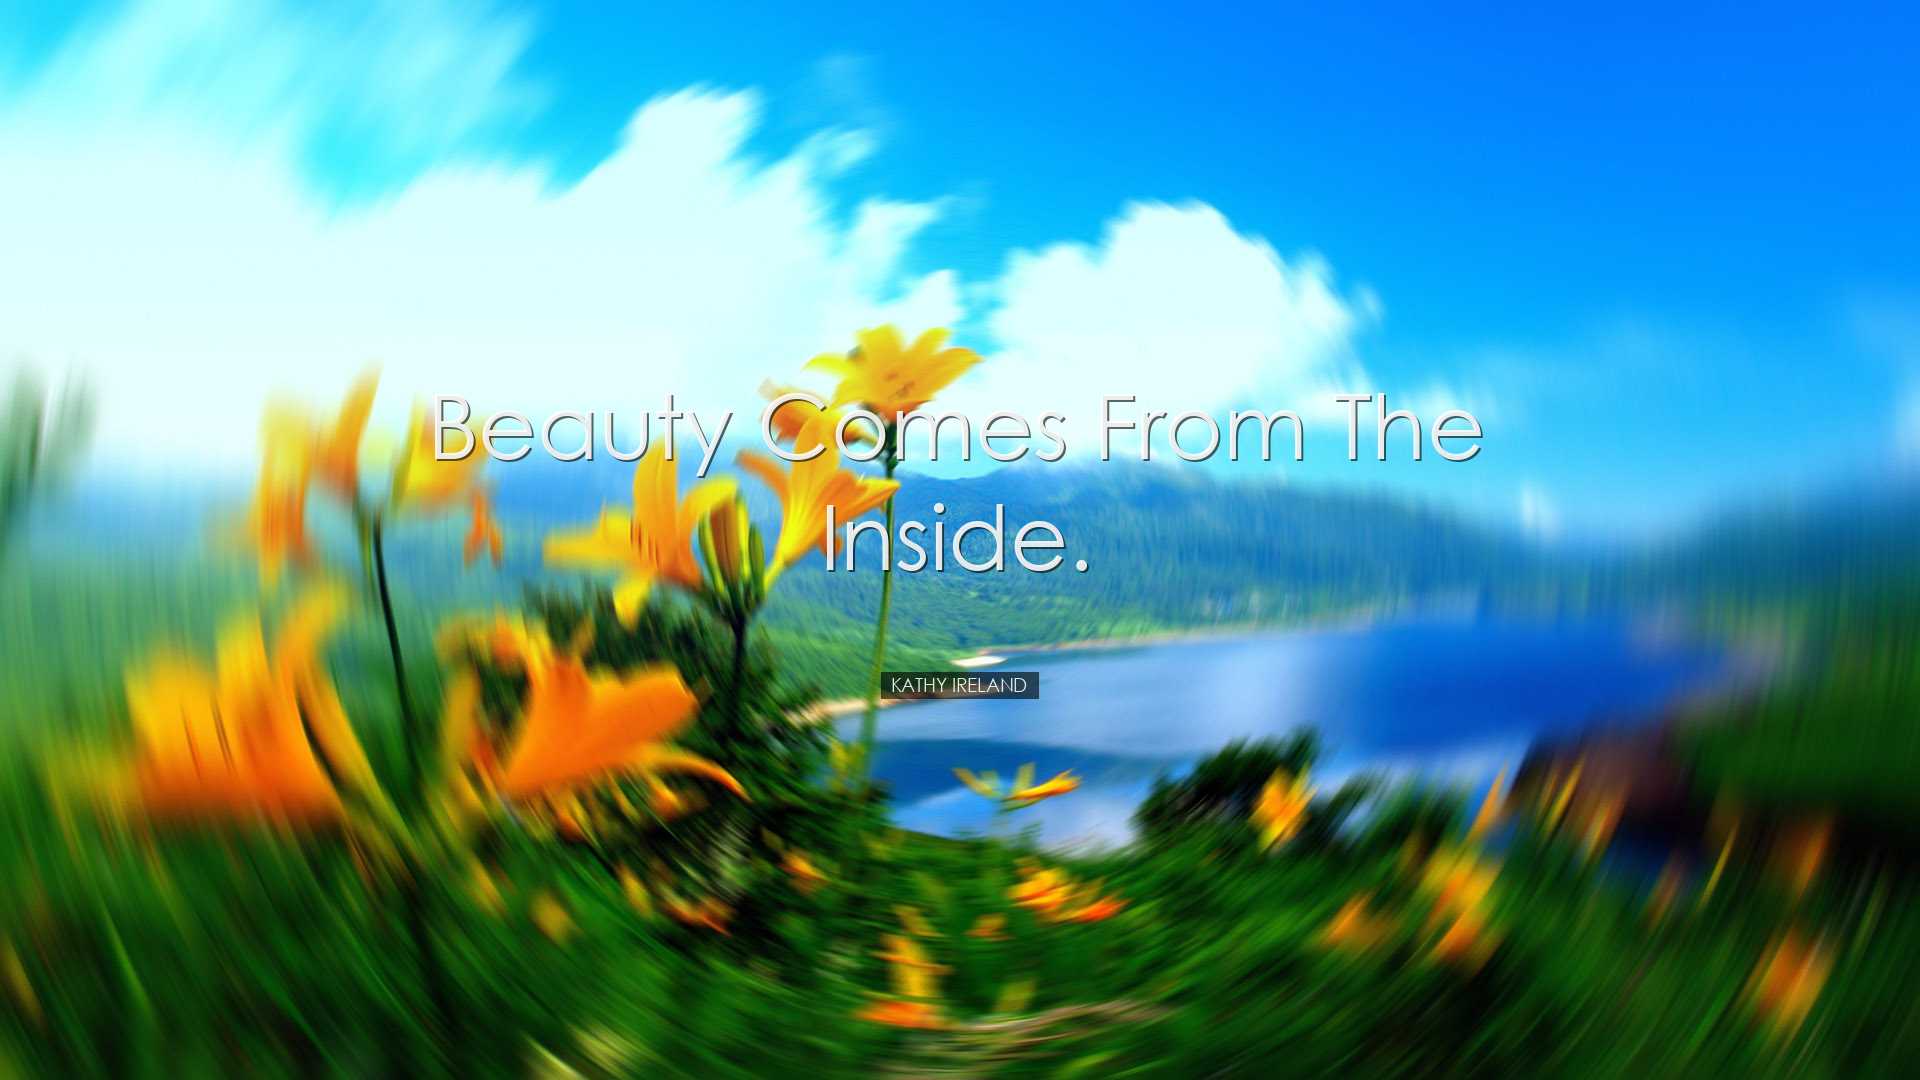 Beauty comes from the inside. - Kathy Ireland